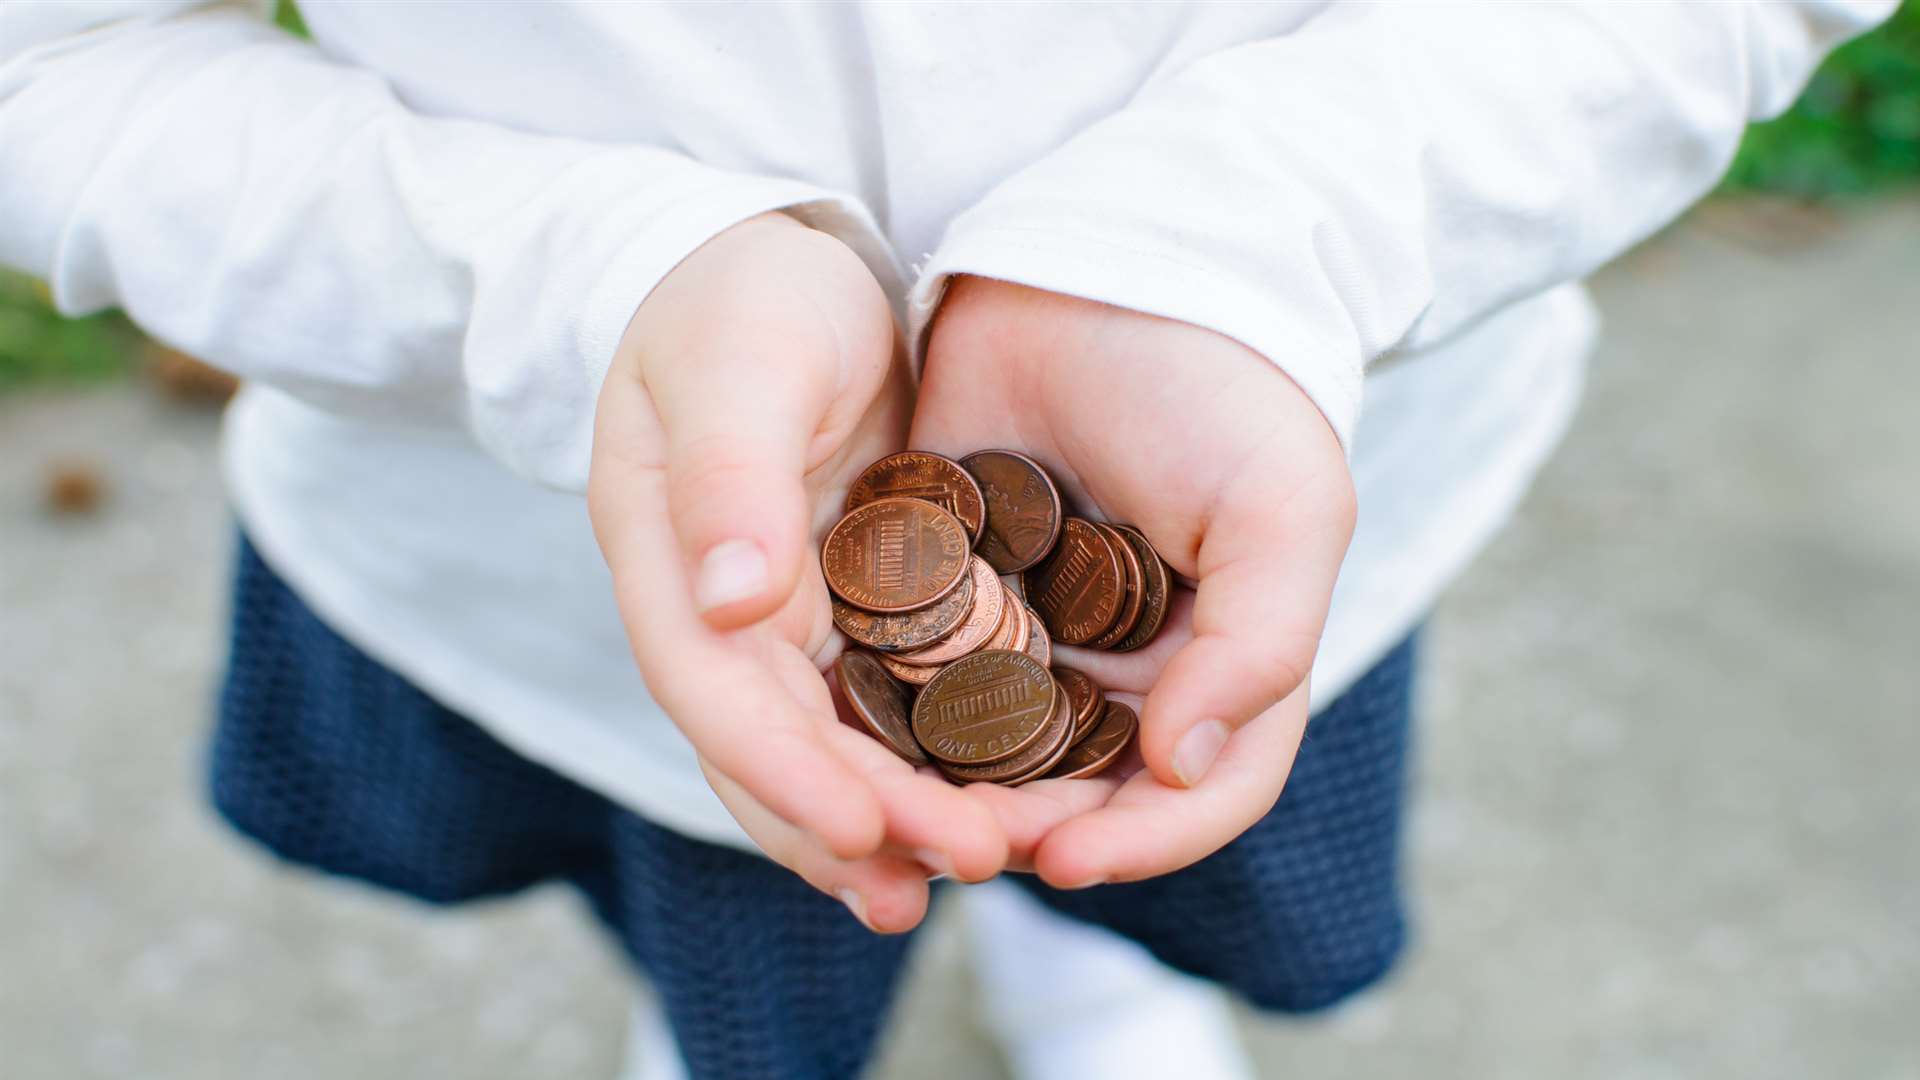 Parents are now feeling more confident in teaching their children about finance